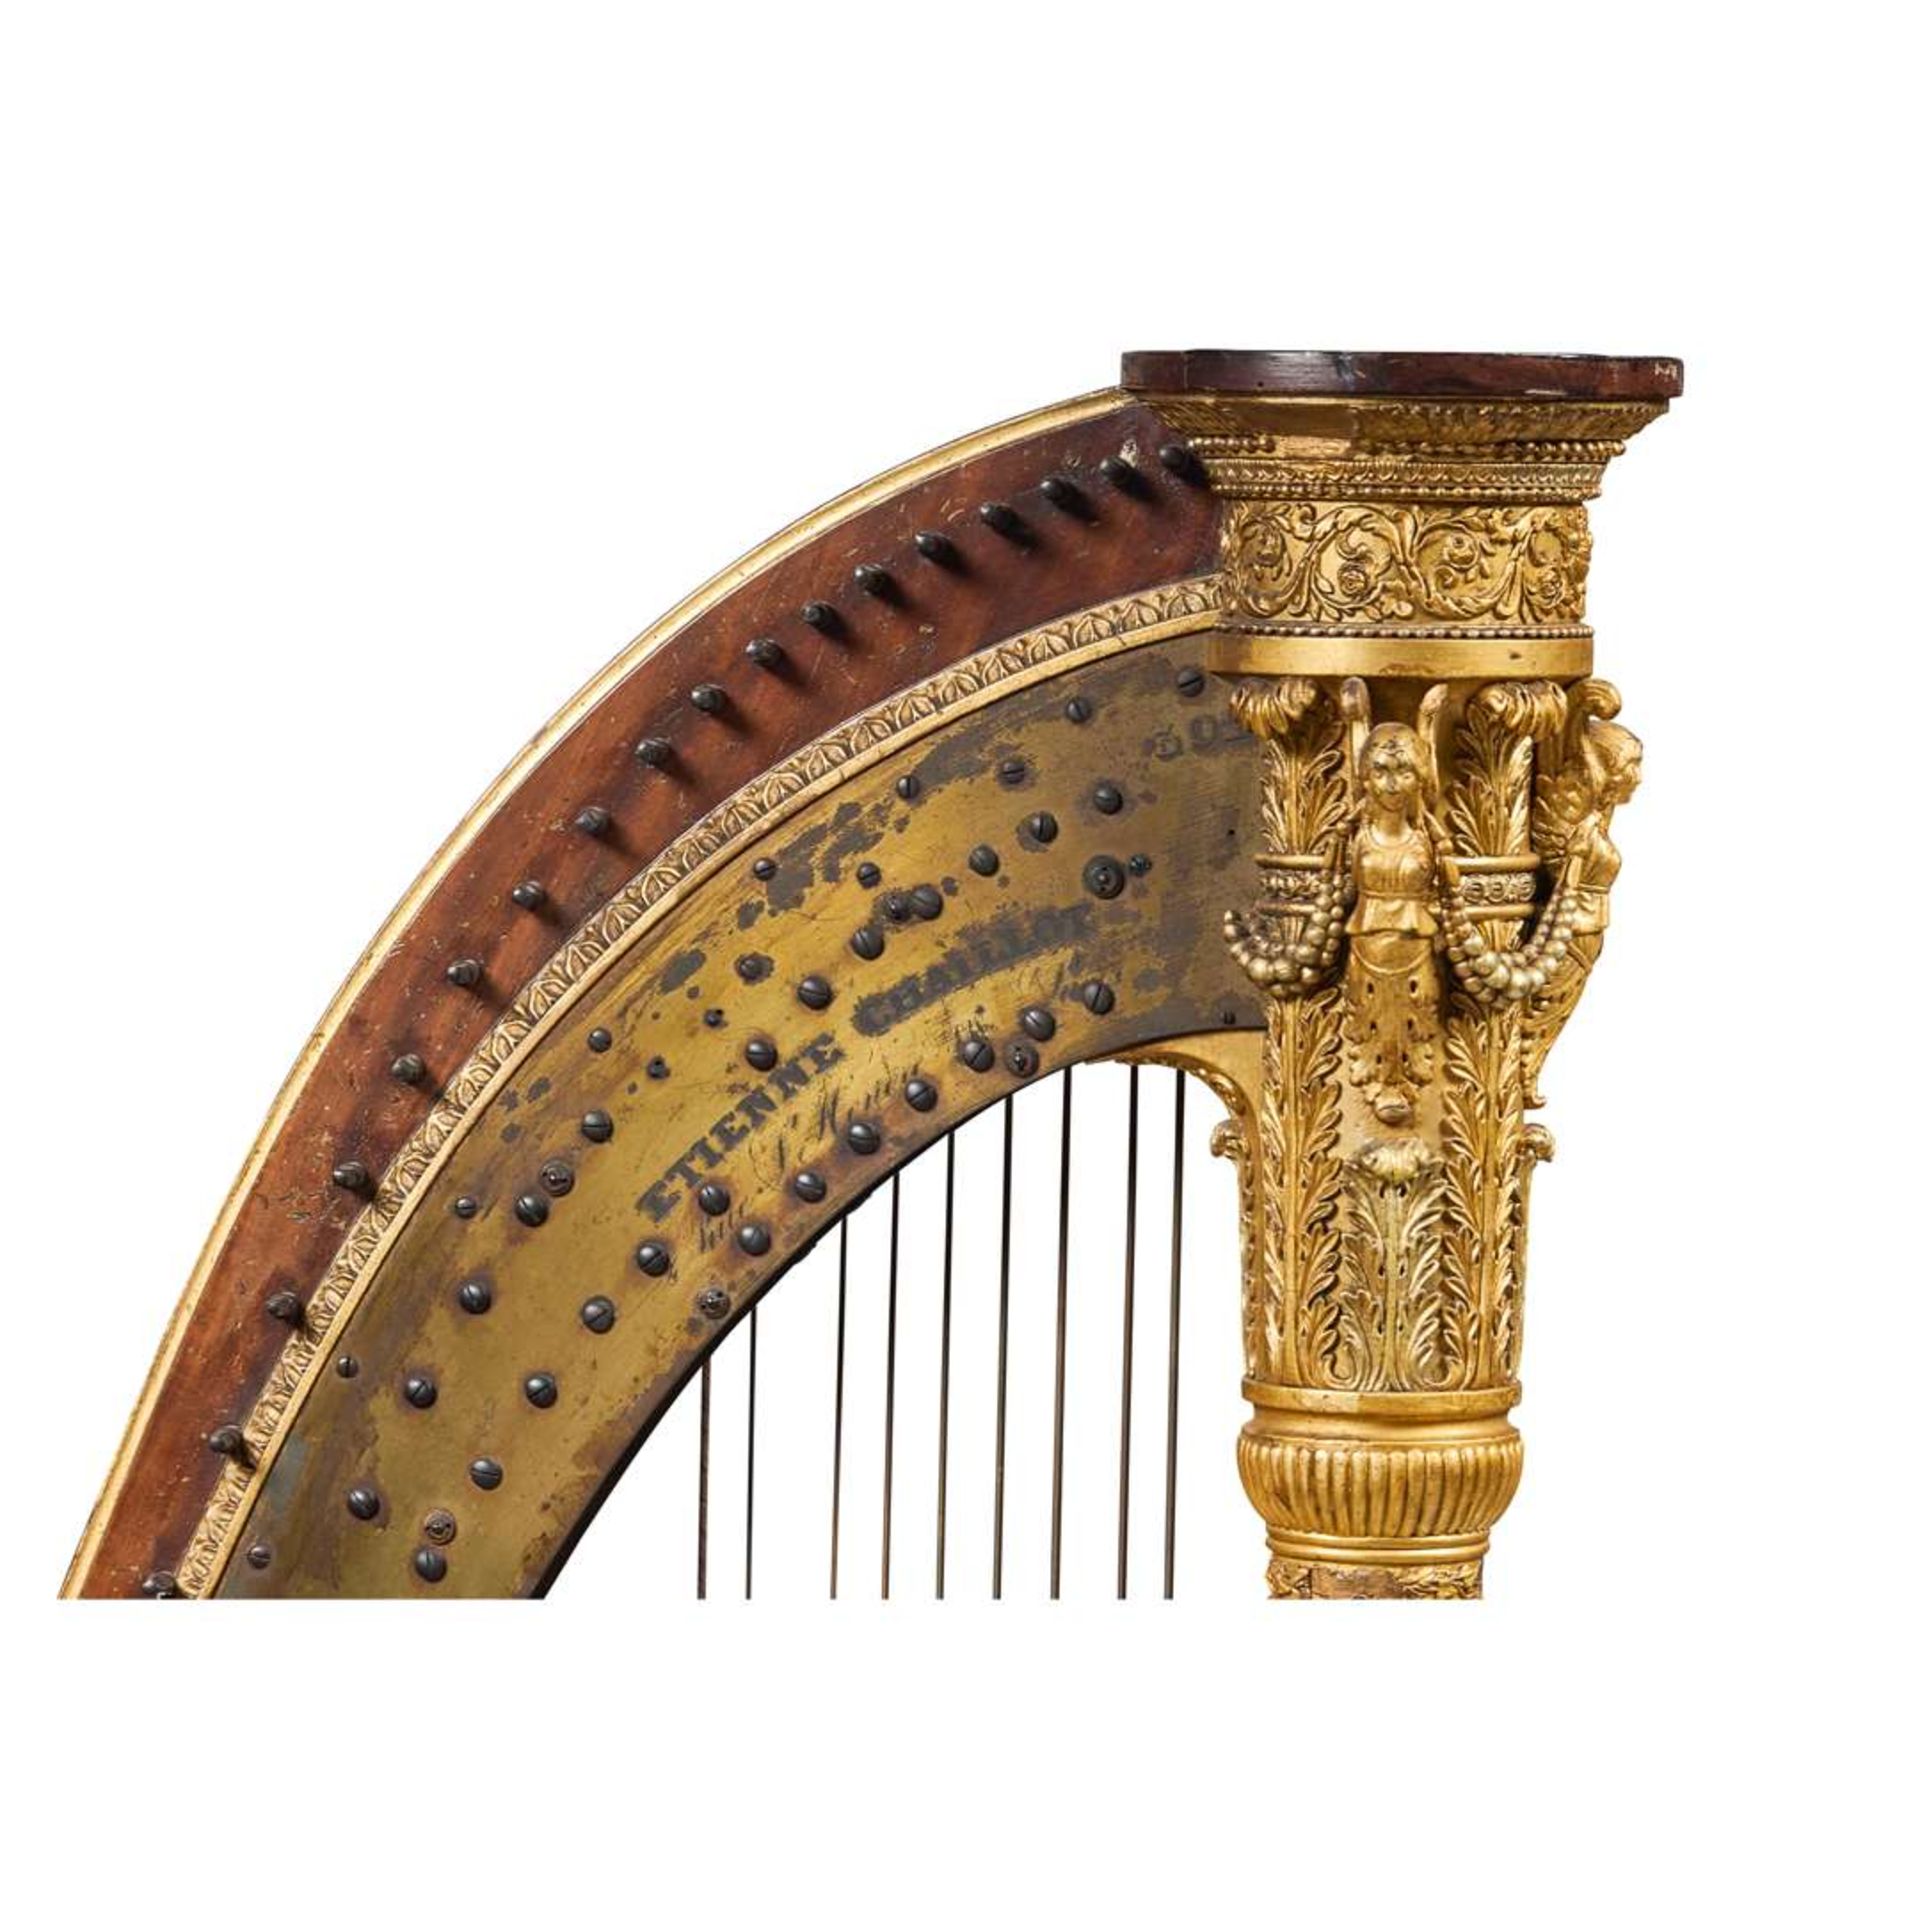 FRENCH PARCEL-GILT AND WALNUT PEDAL HARP, BY ETIENNE CHAILLOT - Image 2 of 3